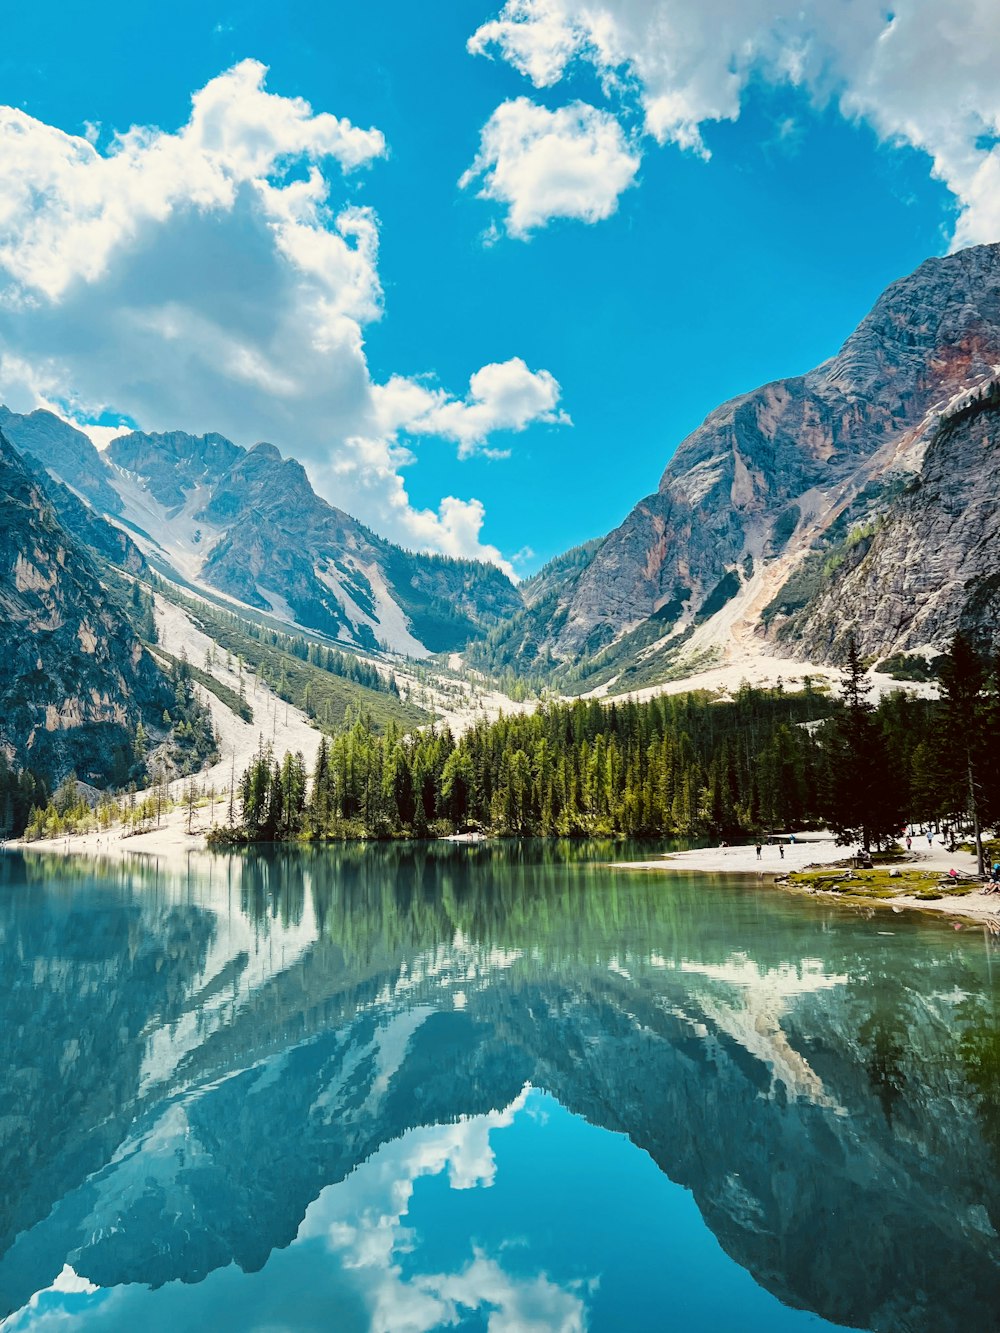 a lake surrounded by mountains under a cloudy blue sky